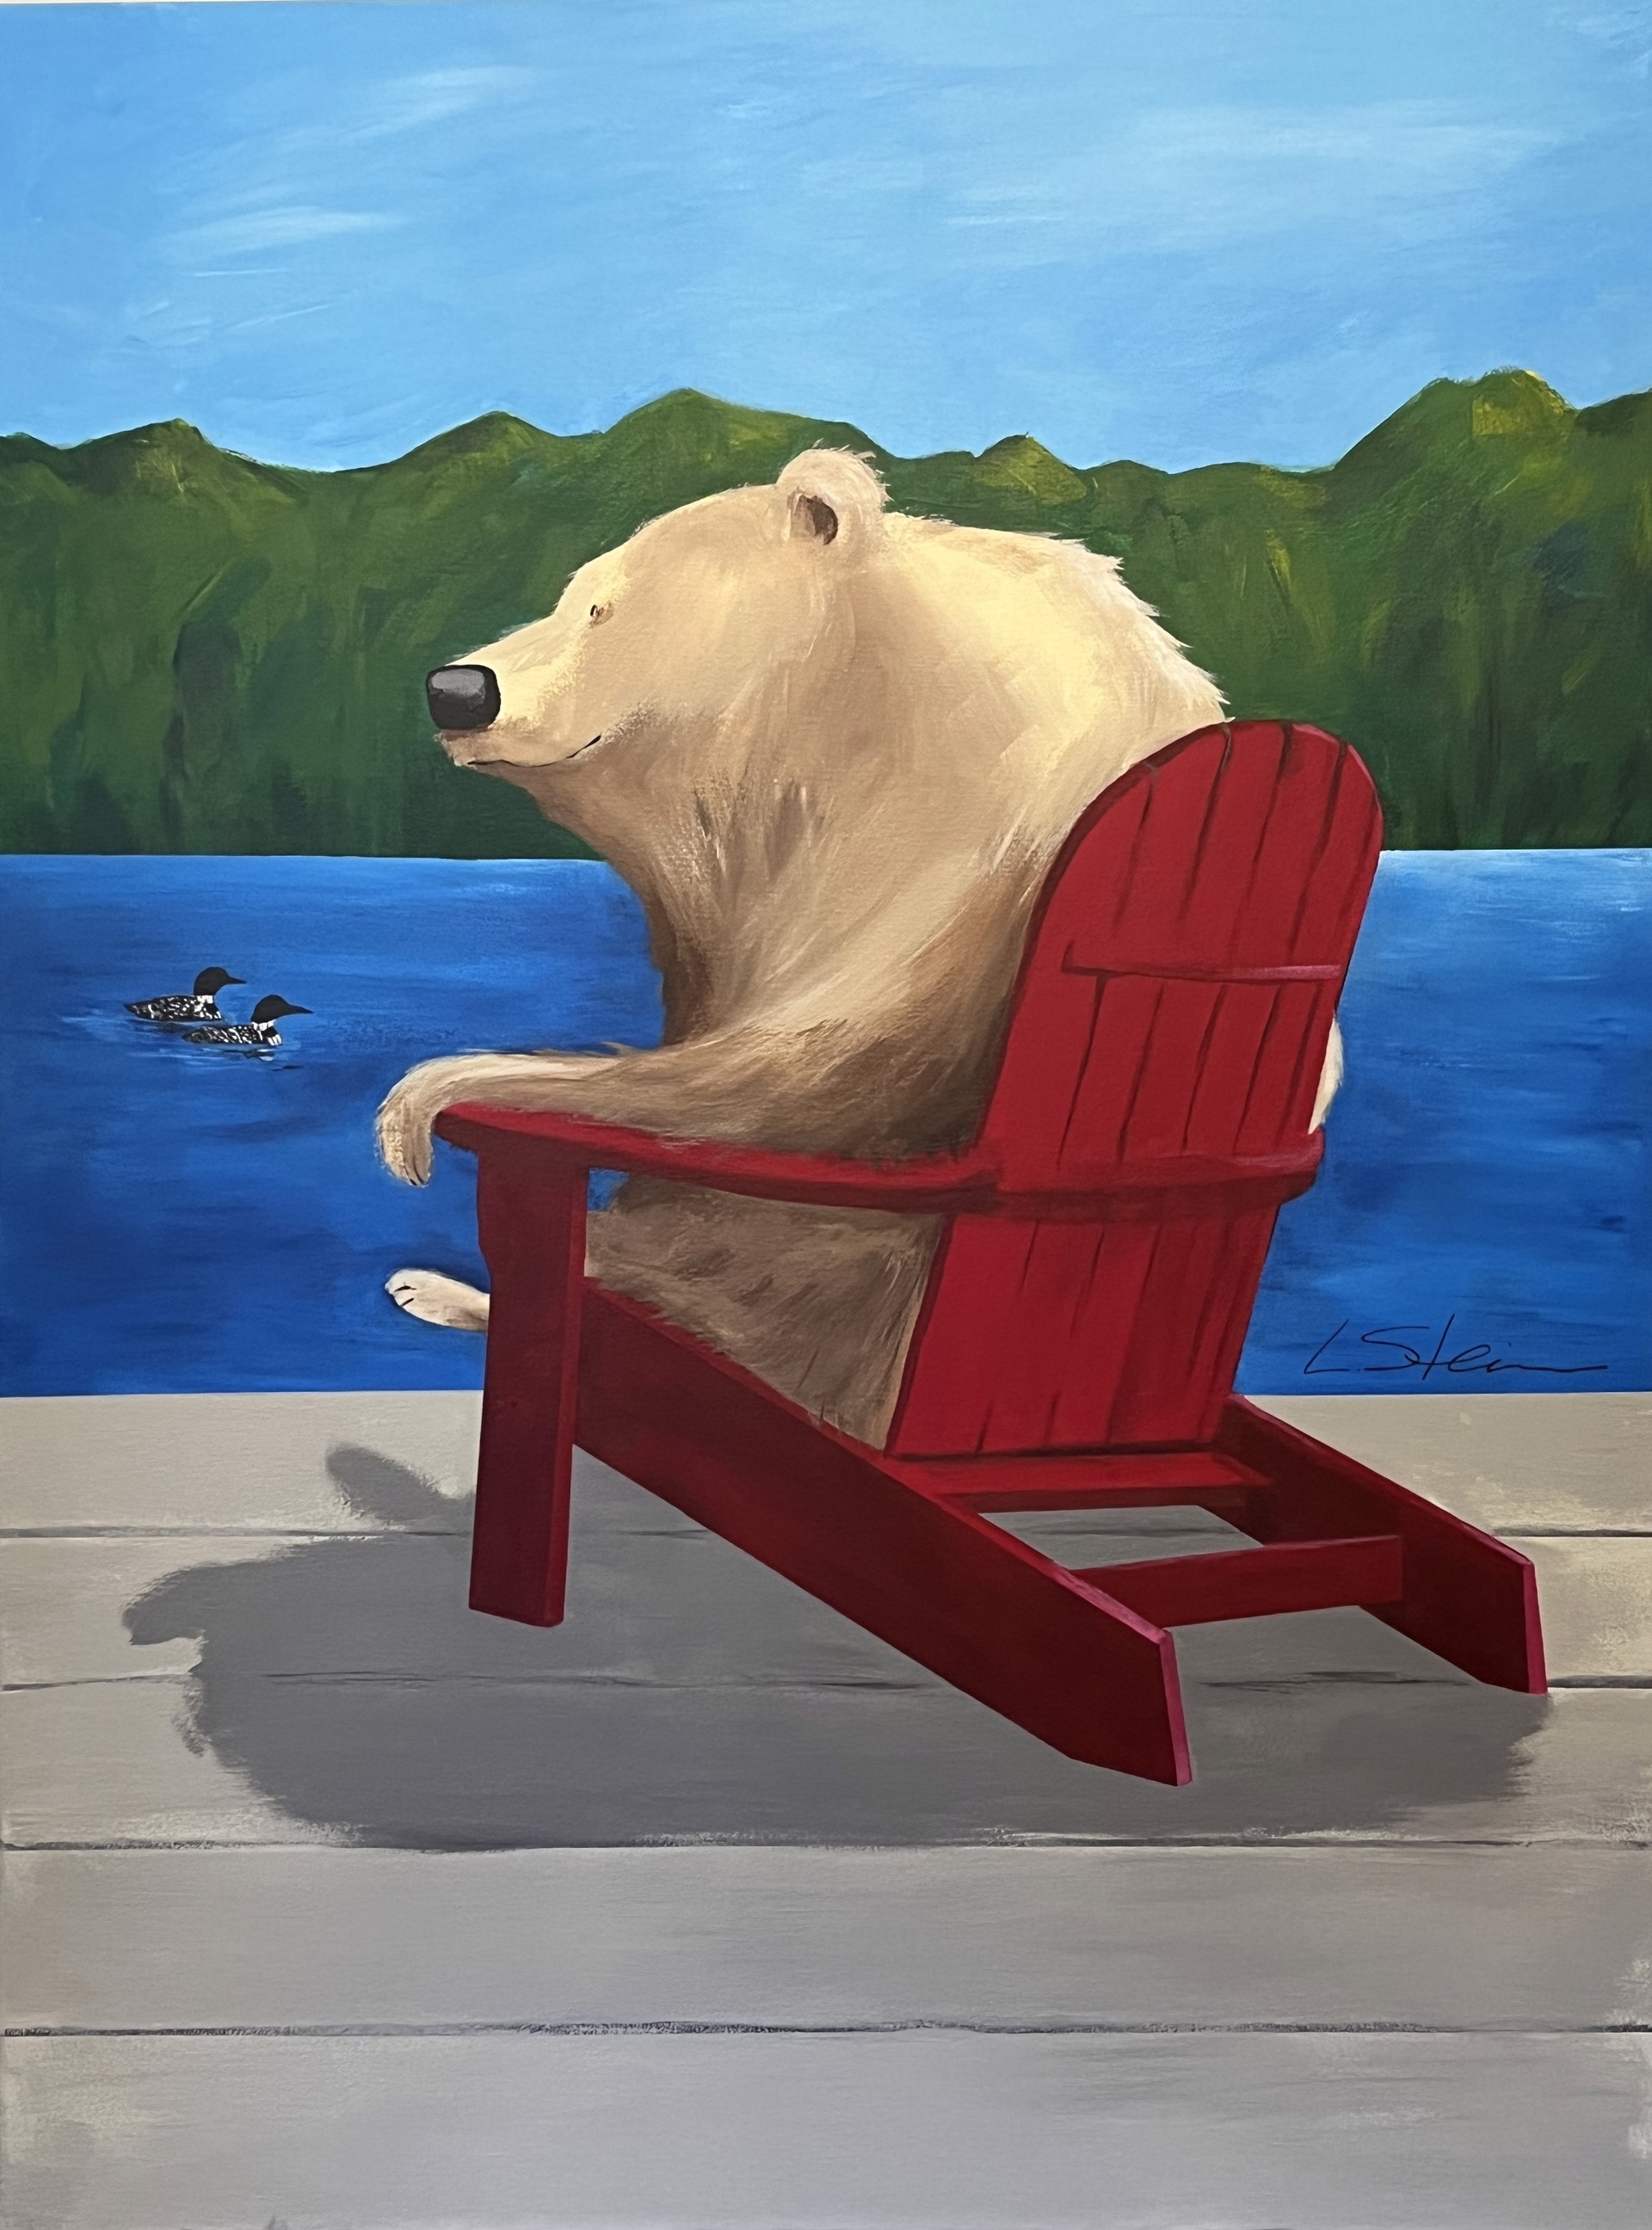 BEAR NAKED AT THE LAKE by Laurie Stein